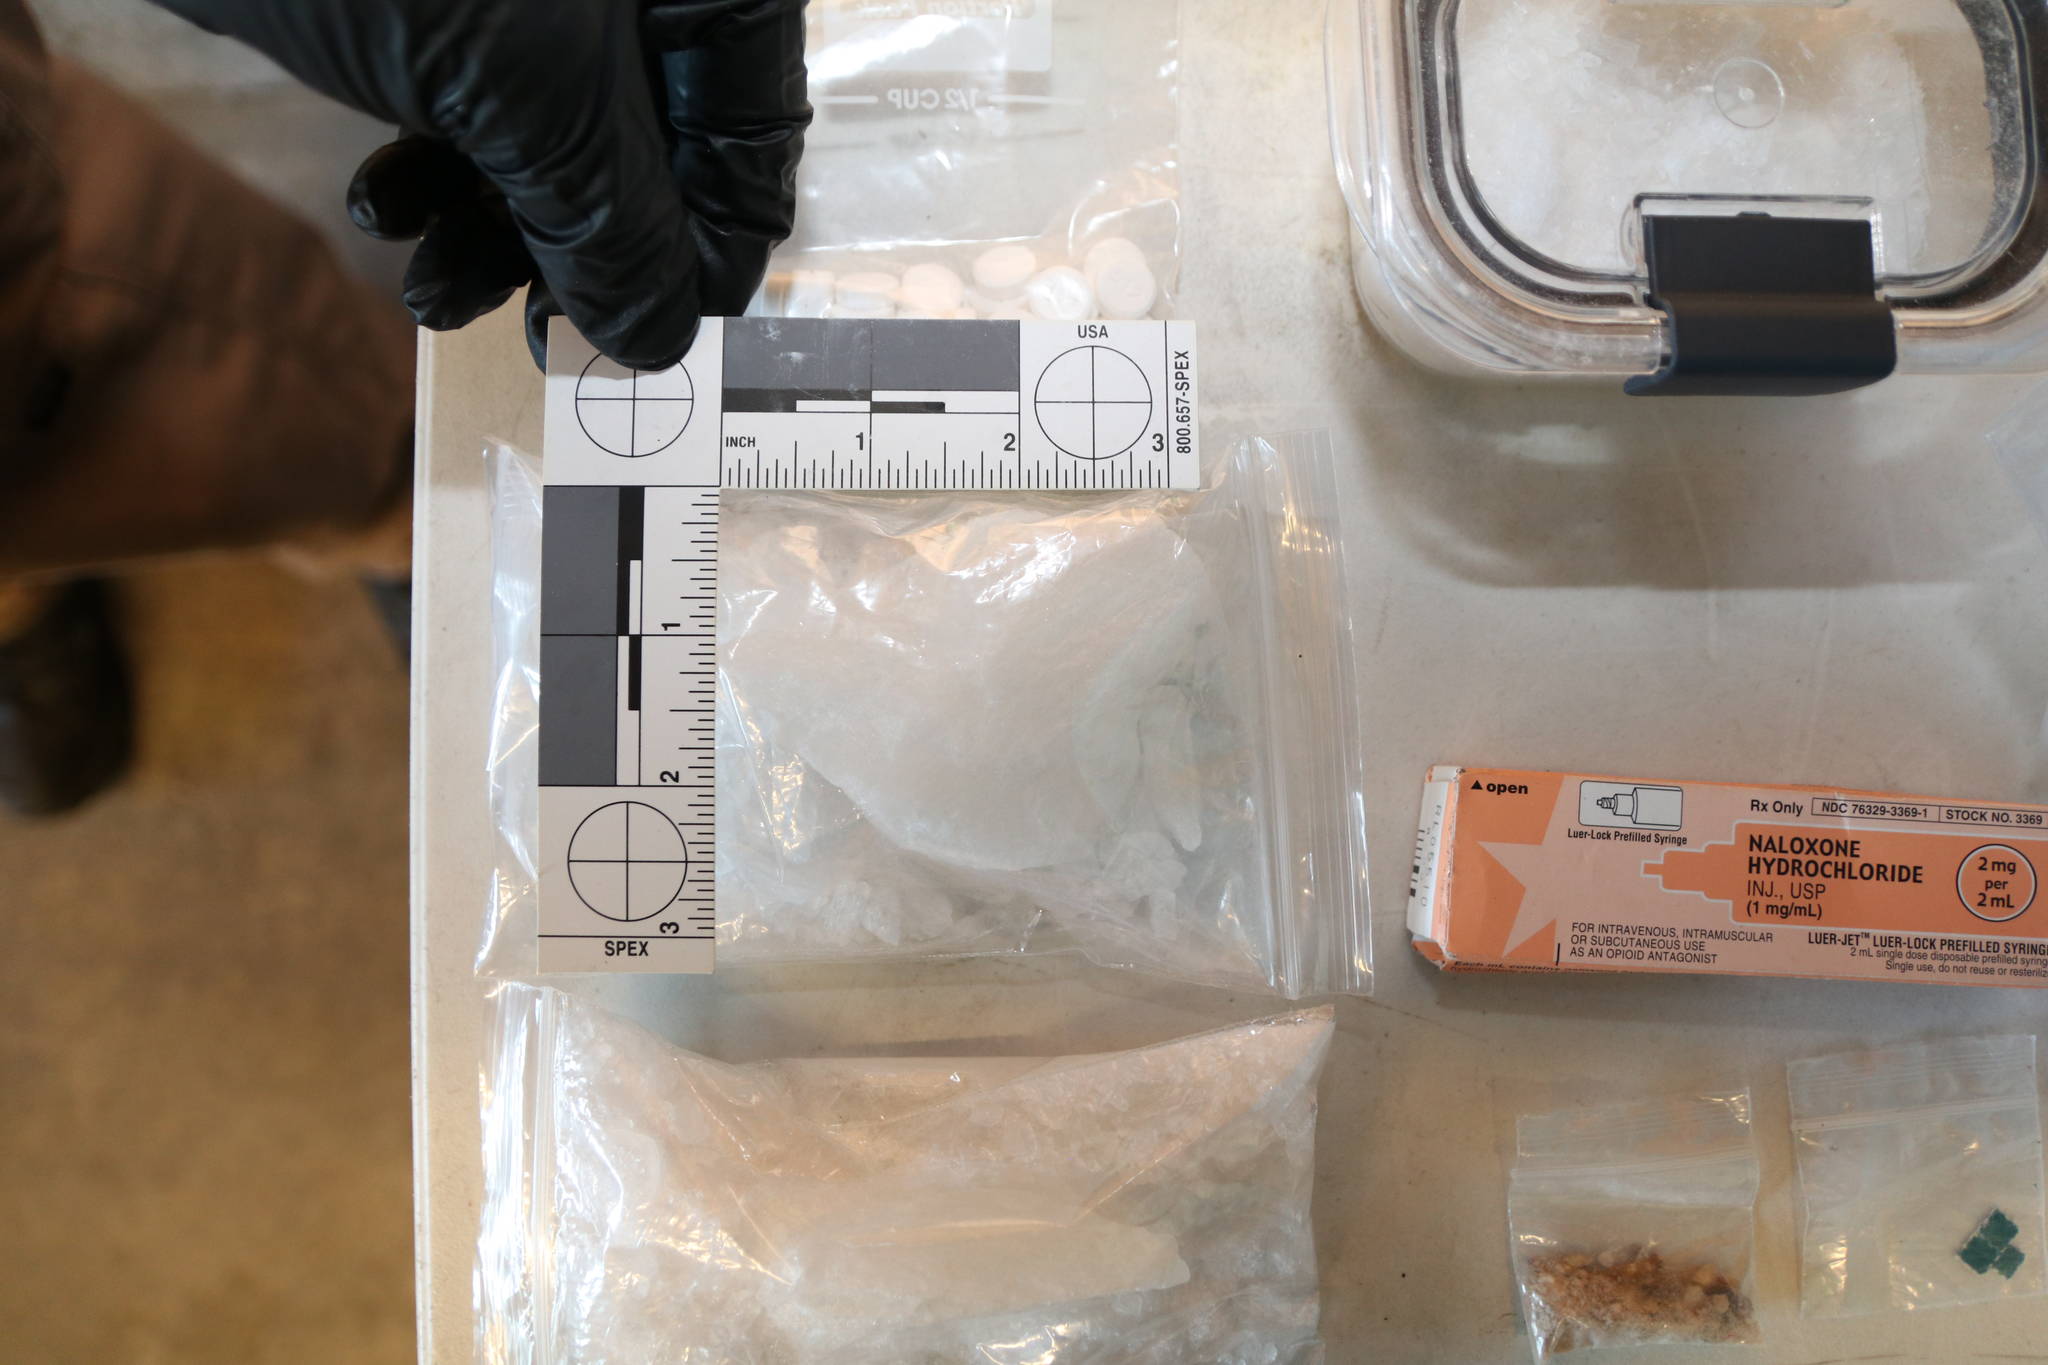 Island County Sheriff's Office photo
Detectives allegedly found a half pound of suspected methamphetamine in a car driven Codie Burley, who was arrested on warrants, according to court documents.